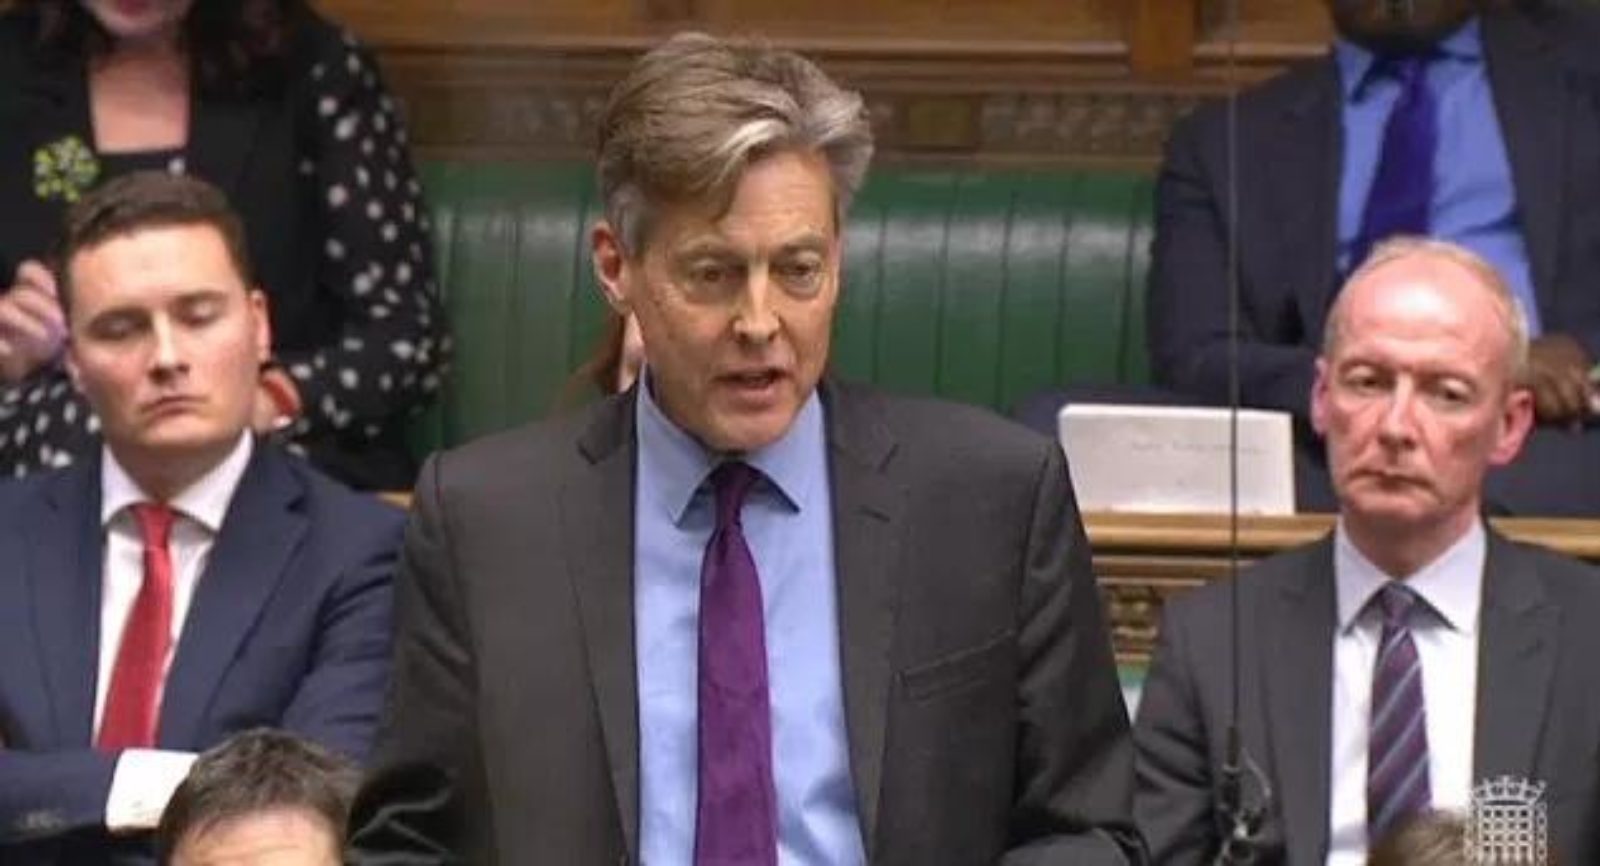 Ben Bradshaw MP in the House of Commons